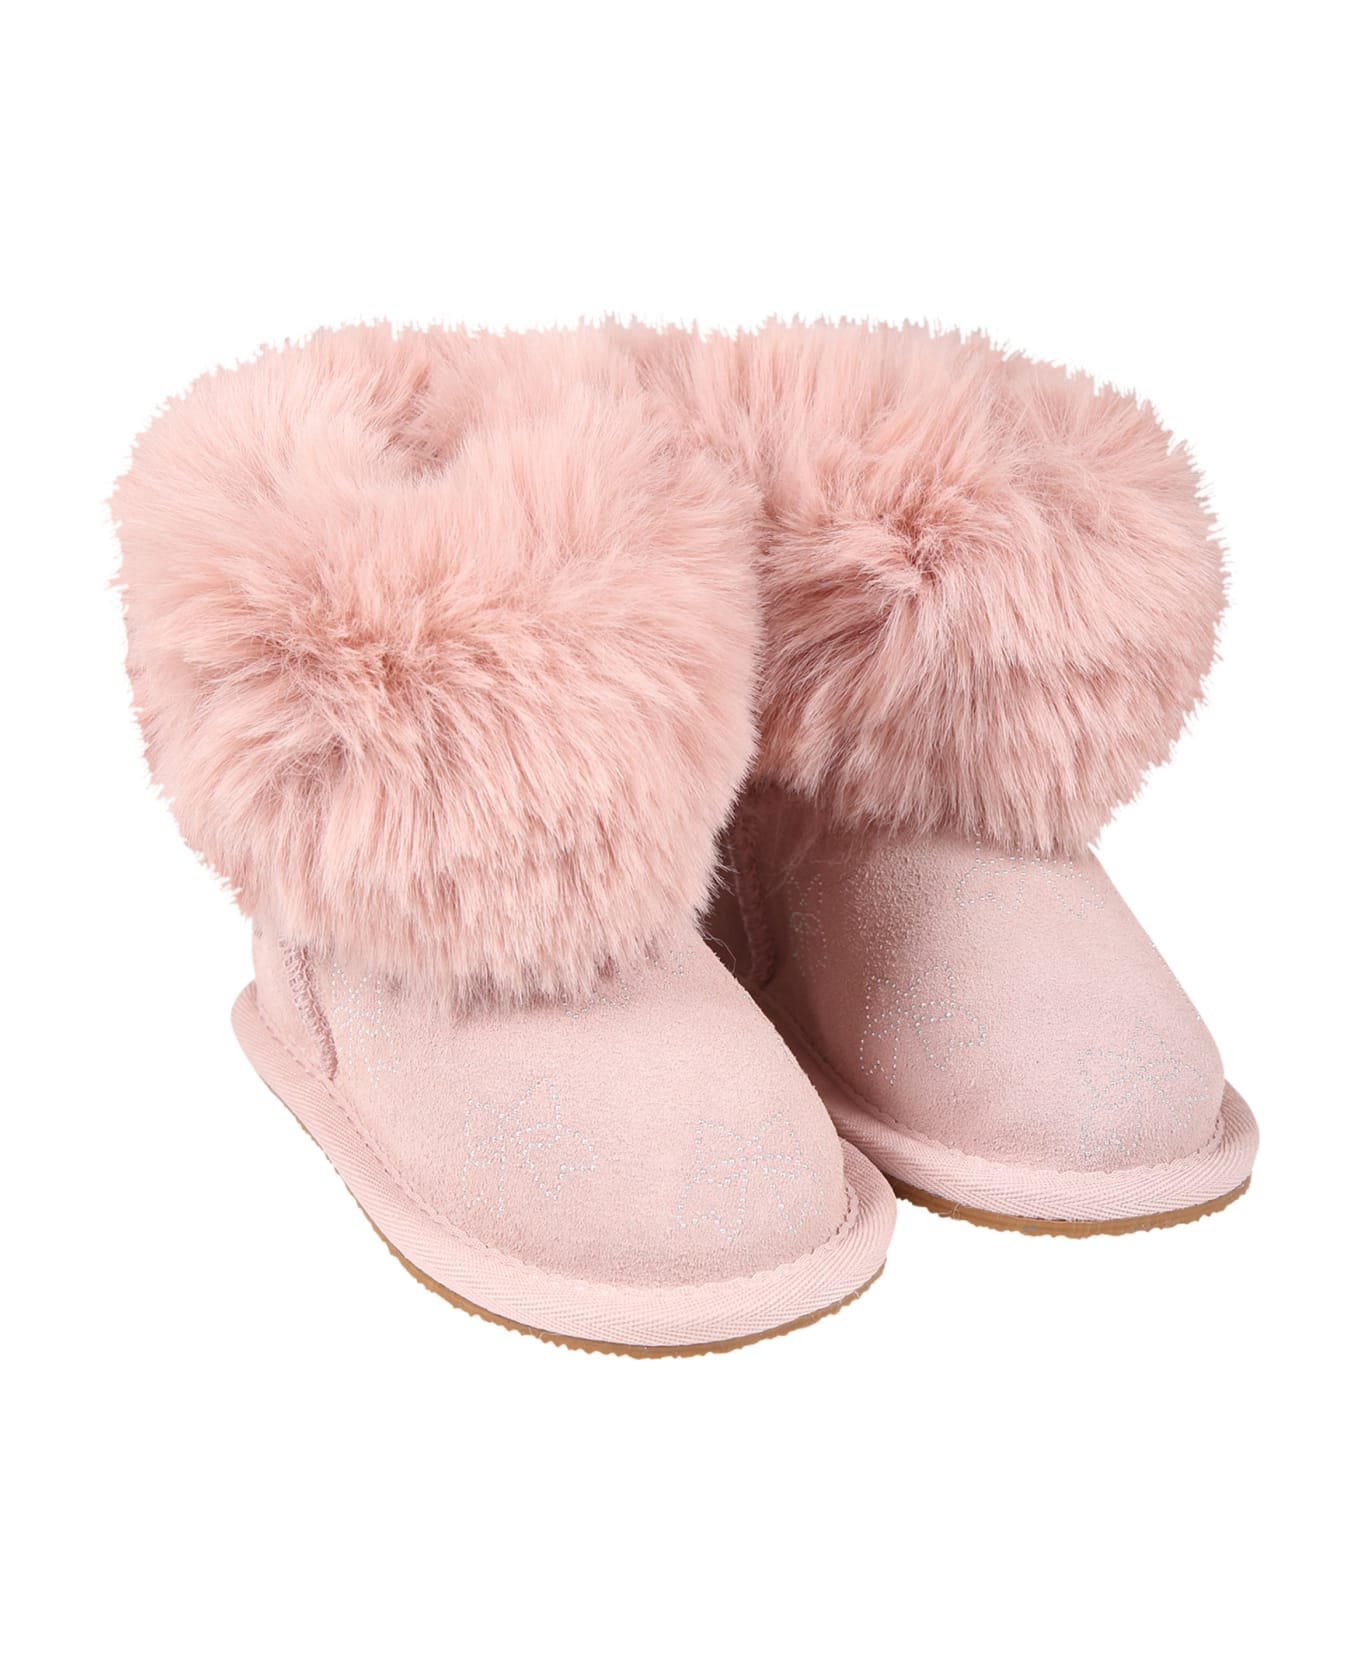 Monnalisa Pink Boots For Girl With Bows - Rosa Antico